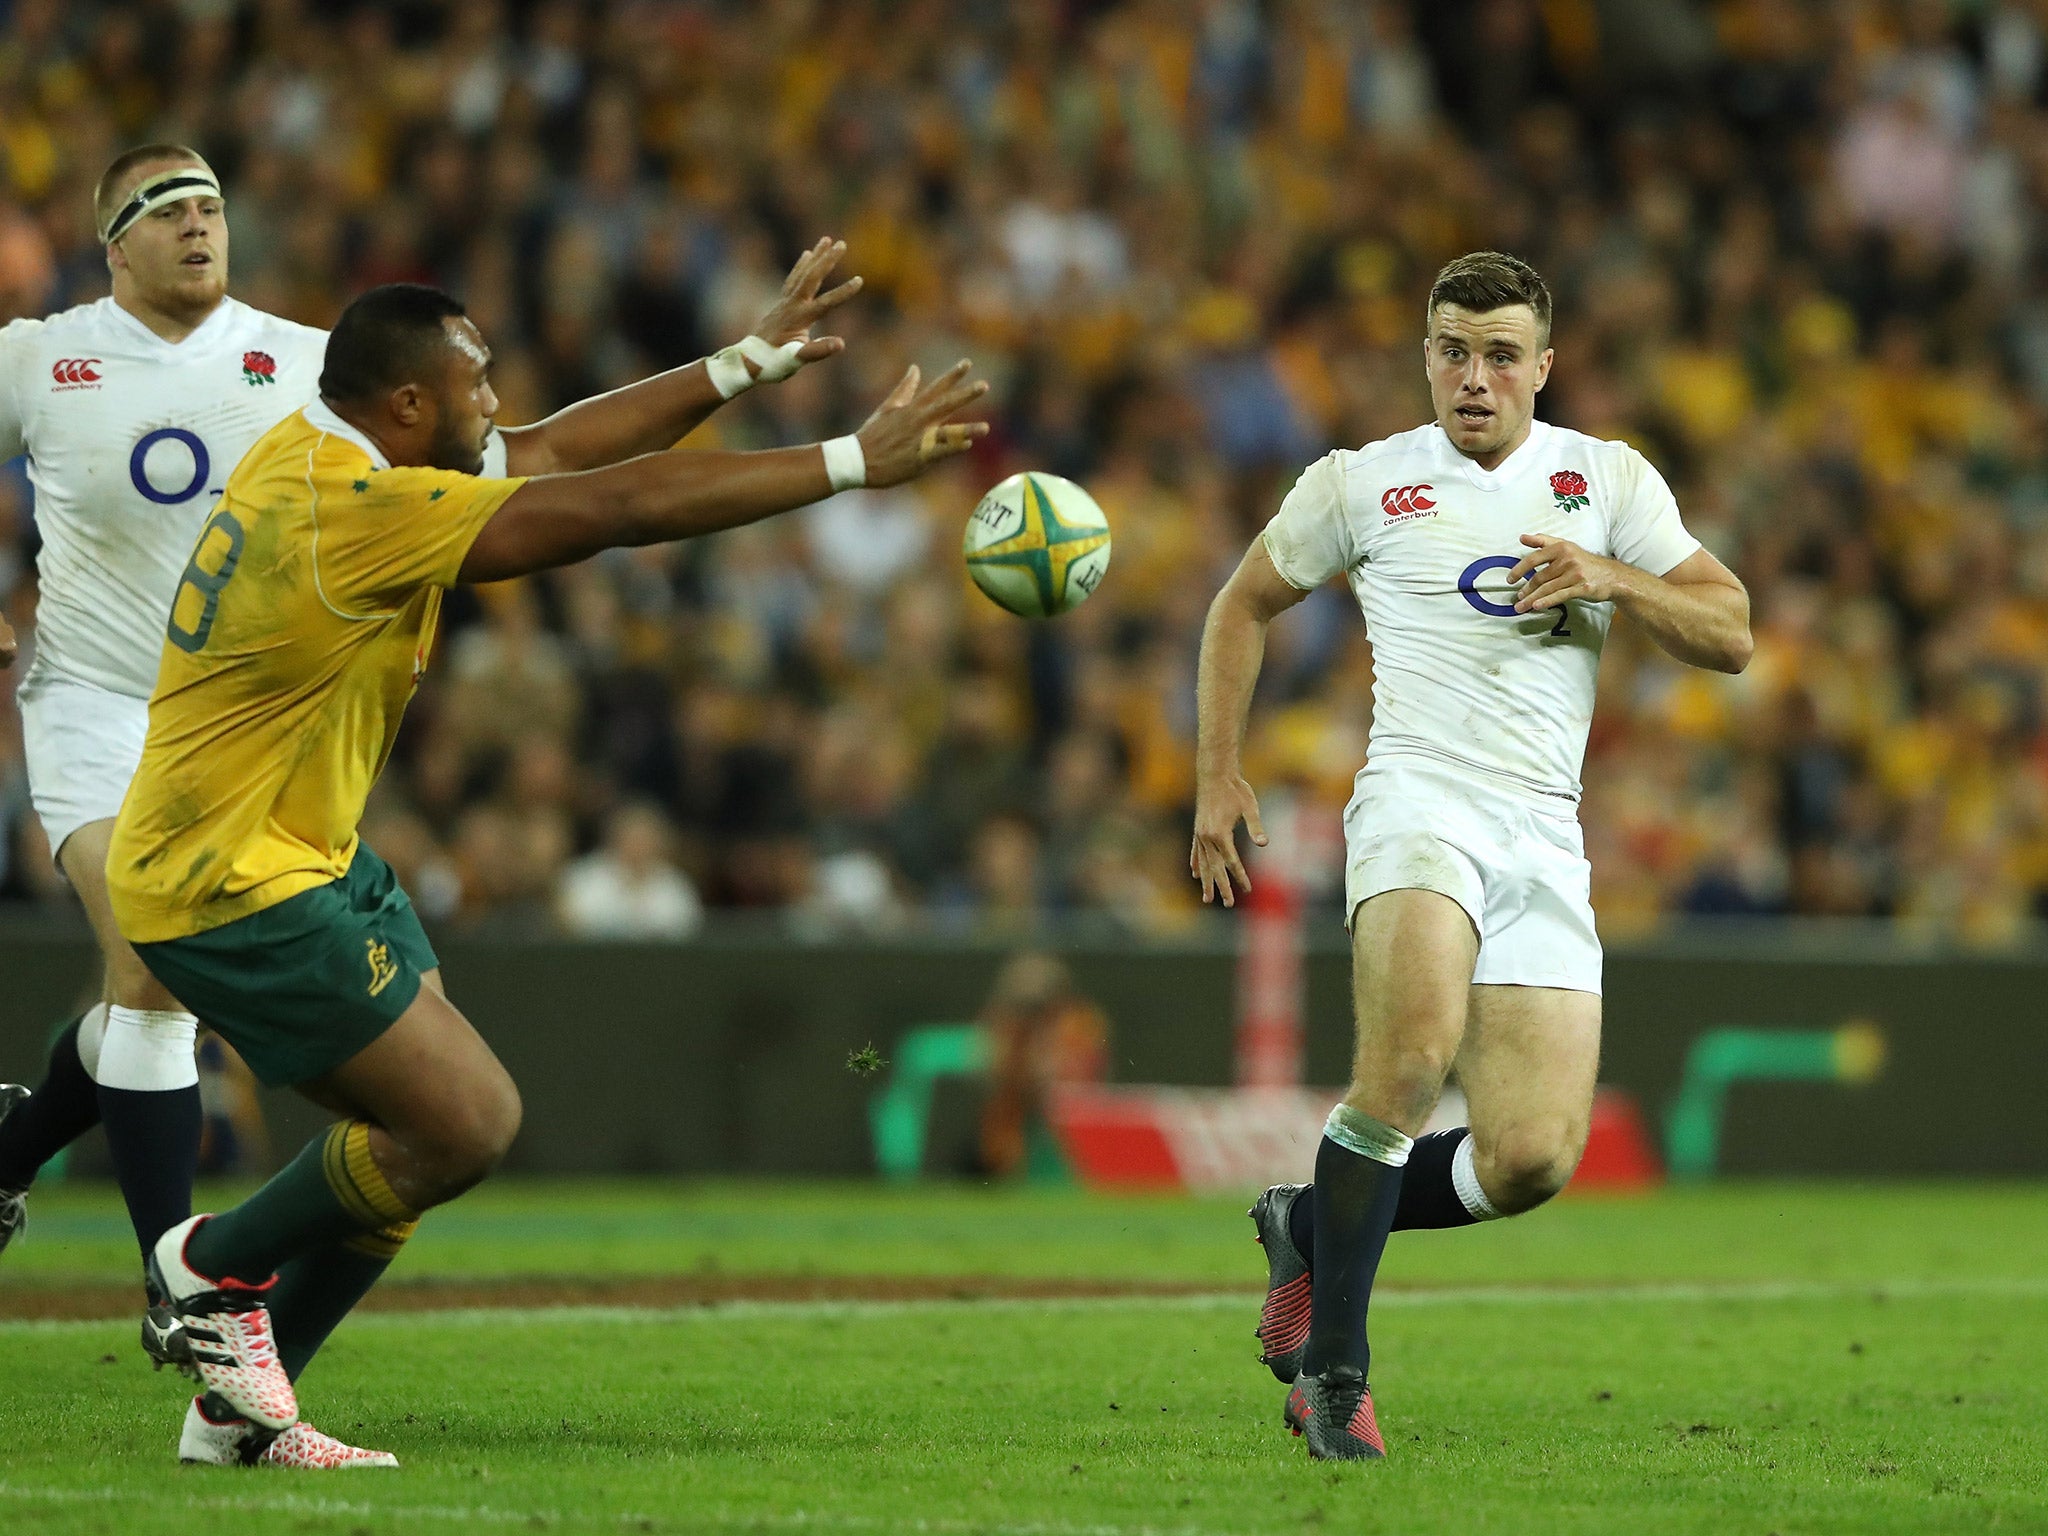 George Ford is in line for an England recall for the second Test against Australia